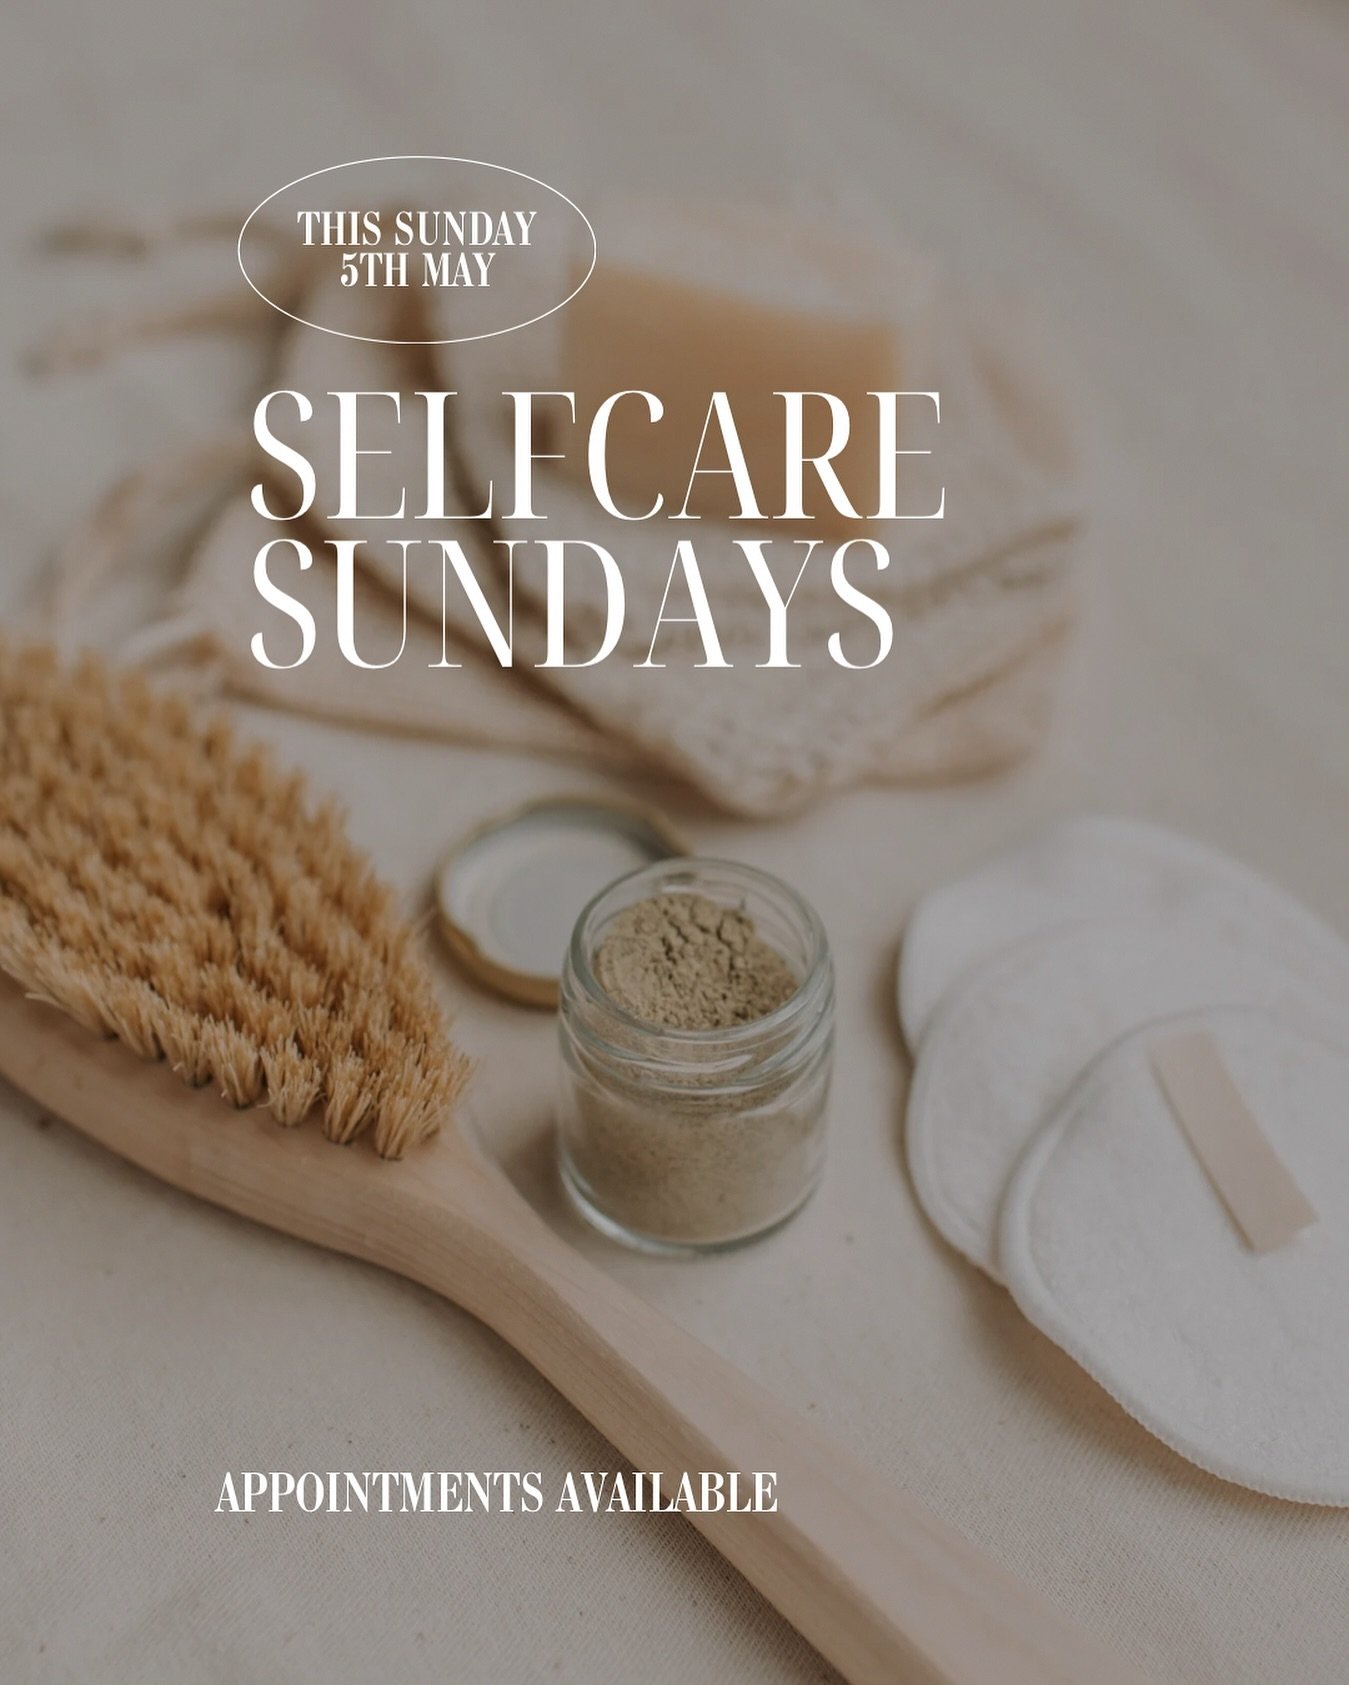 SelfCare Sundays ☁️✨

We have availability for this Sunday 5th May.

For more info &amp; how to book 
Website: www.atthebay.co.uk
Reception: 01702936156
Text/Whatsapp : 07708384740

Opening Times

Monday Closed
Tuesday 9:00 - 20:00
Wednesday 9:00 - 2